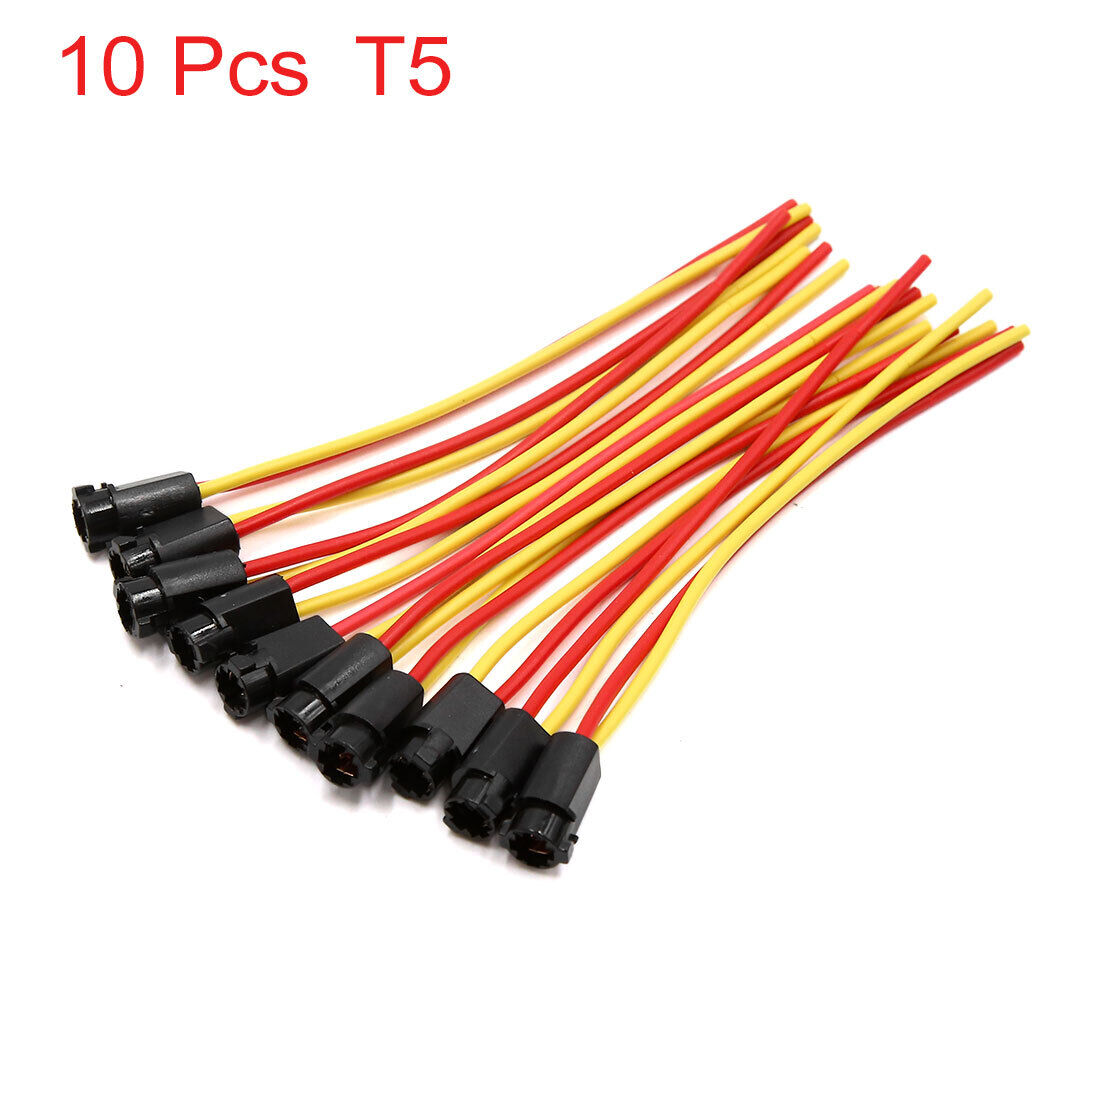 10pcs T5 Dashboard Light Bulb Wiring Harness Socket Connector for Automobile